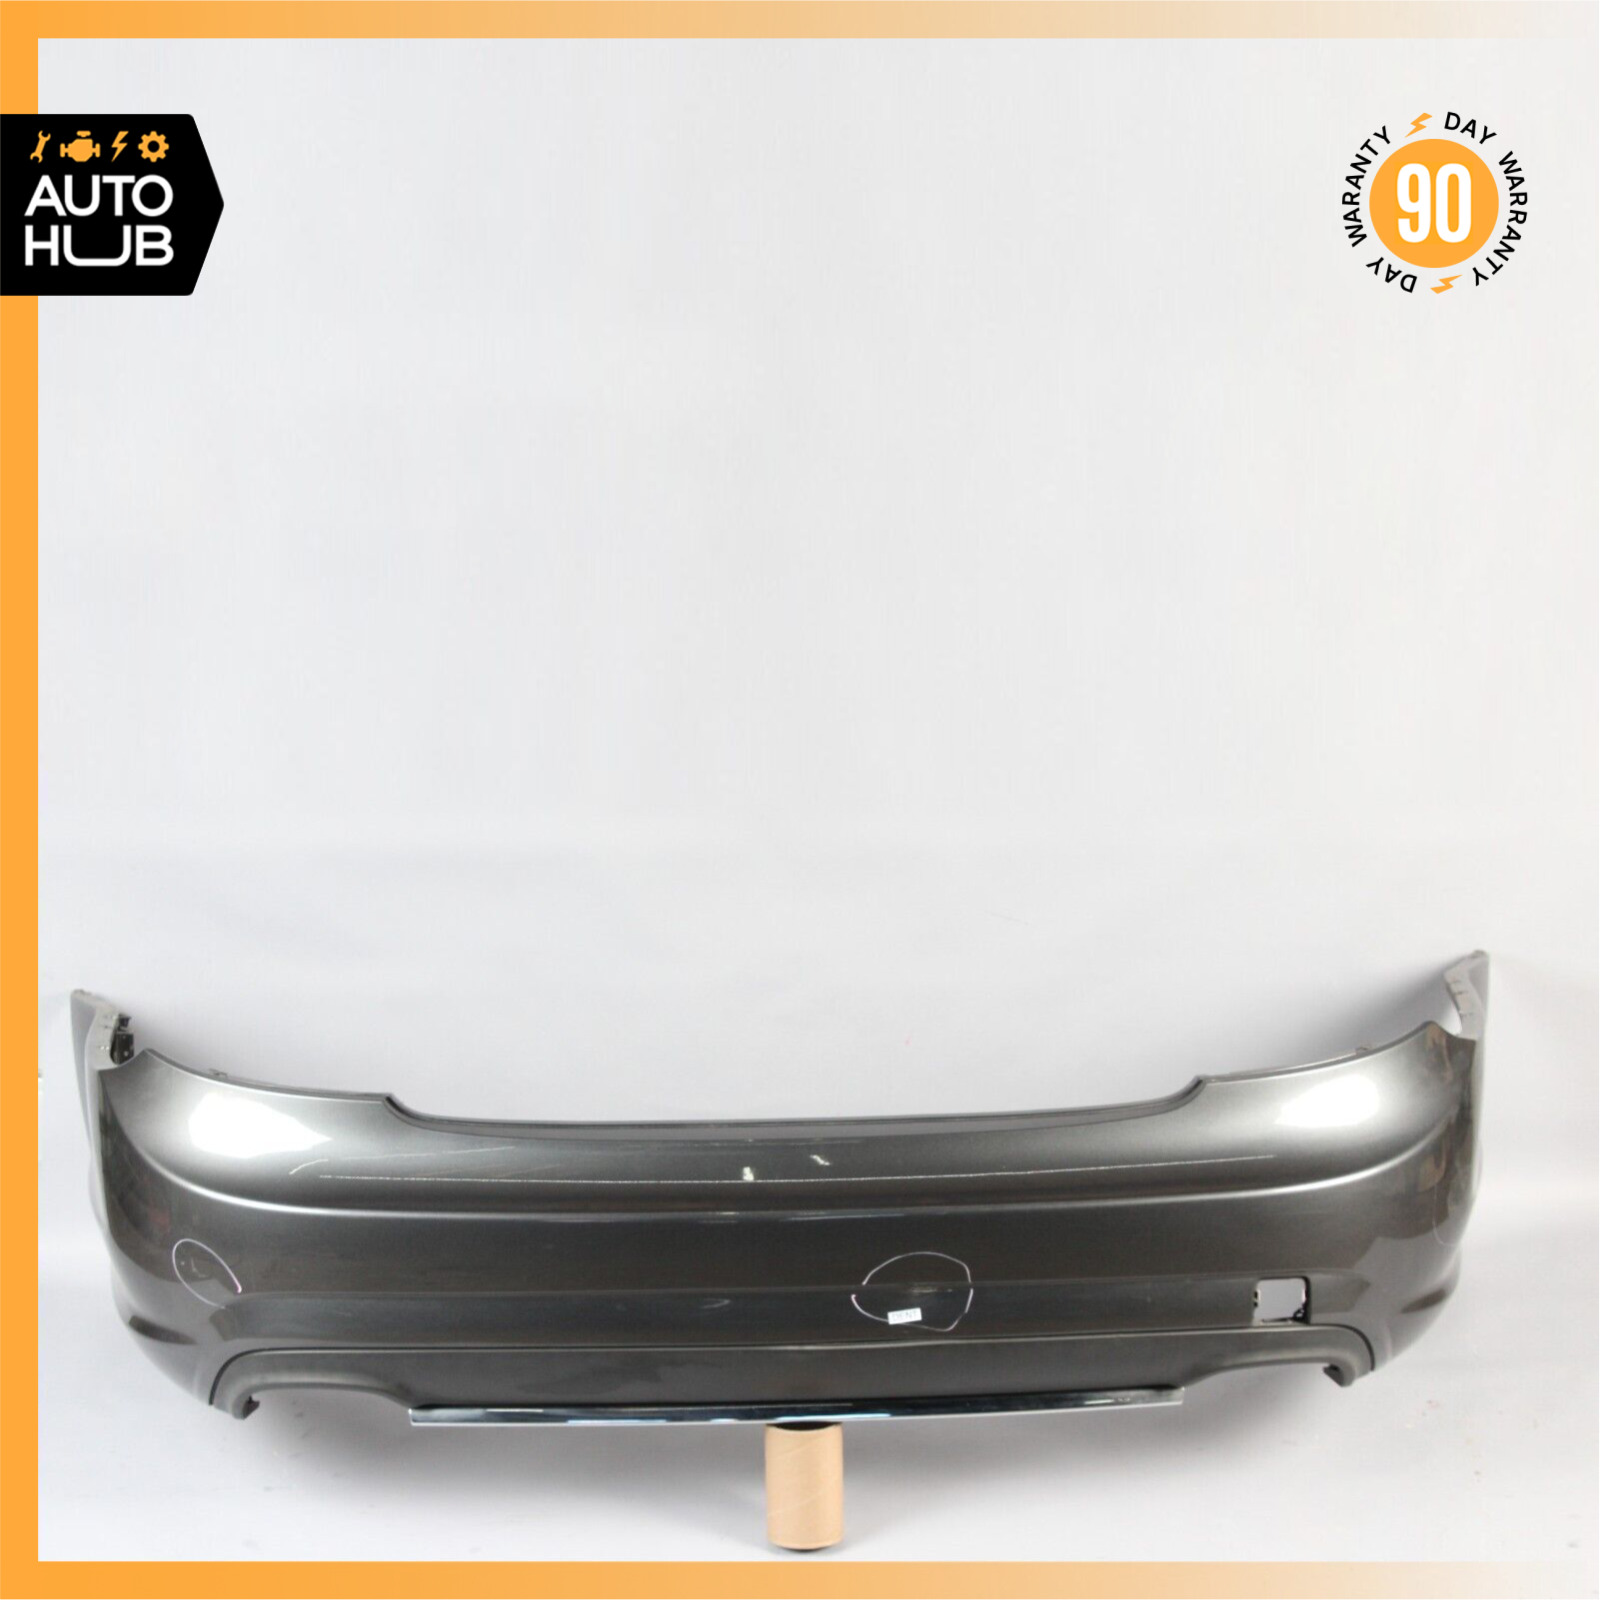 07-10 Mercedes W216 CL550 CL600 Sport AMG Rear Bumper Cover Assembly OEM